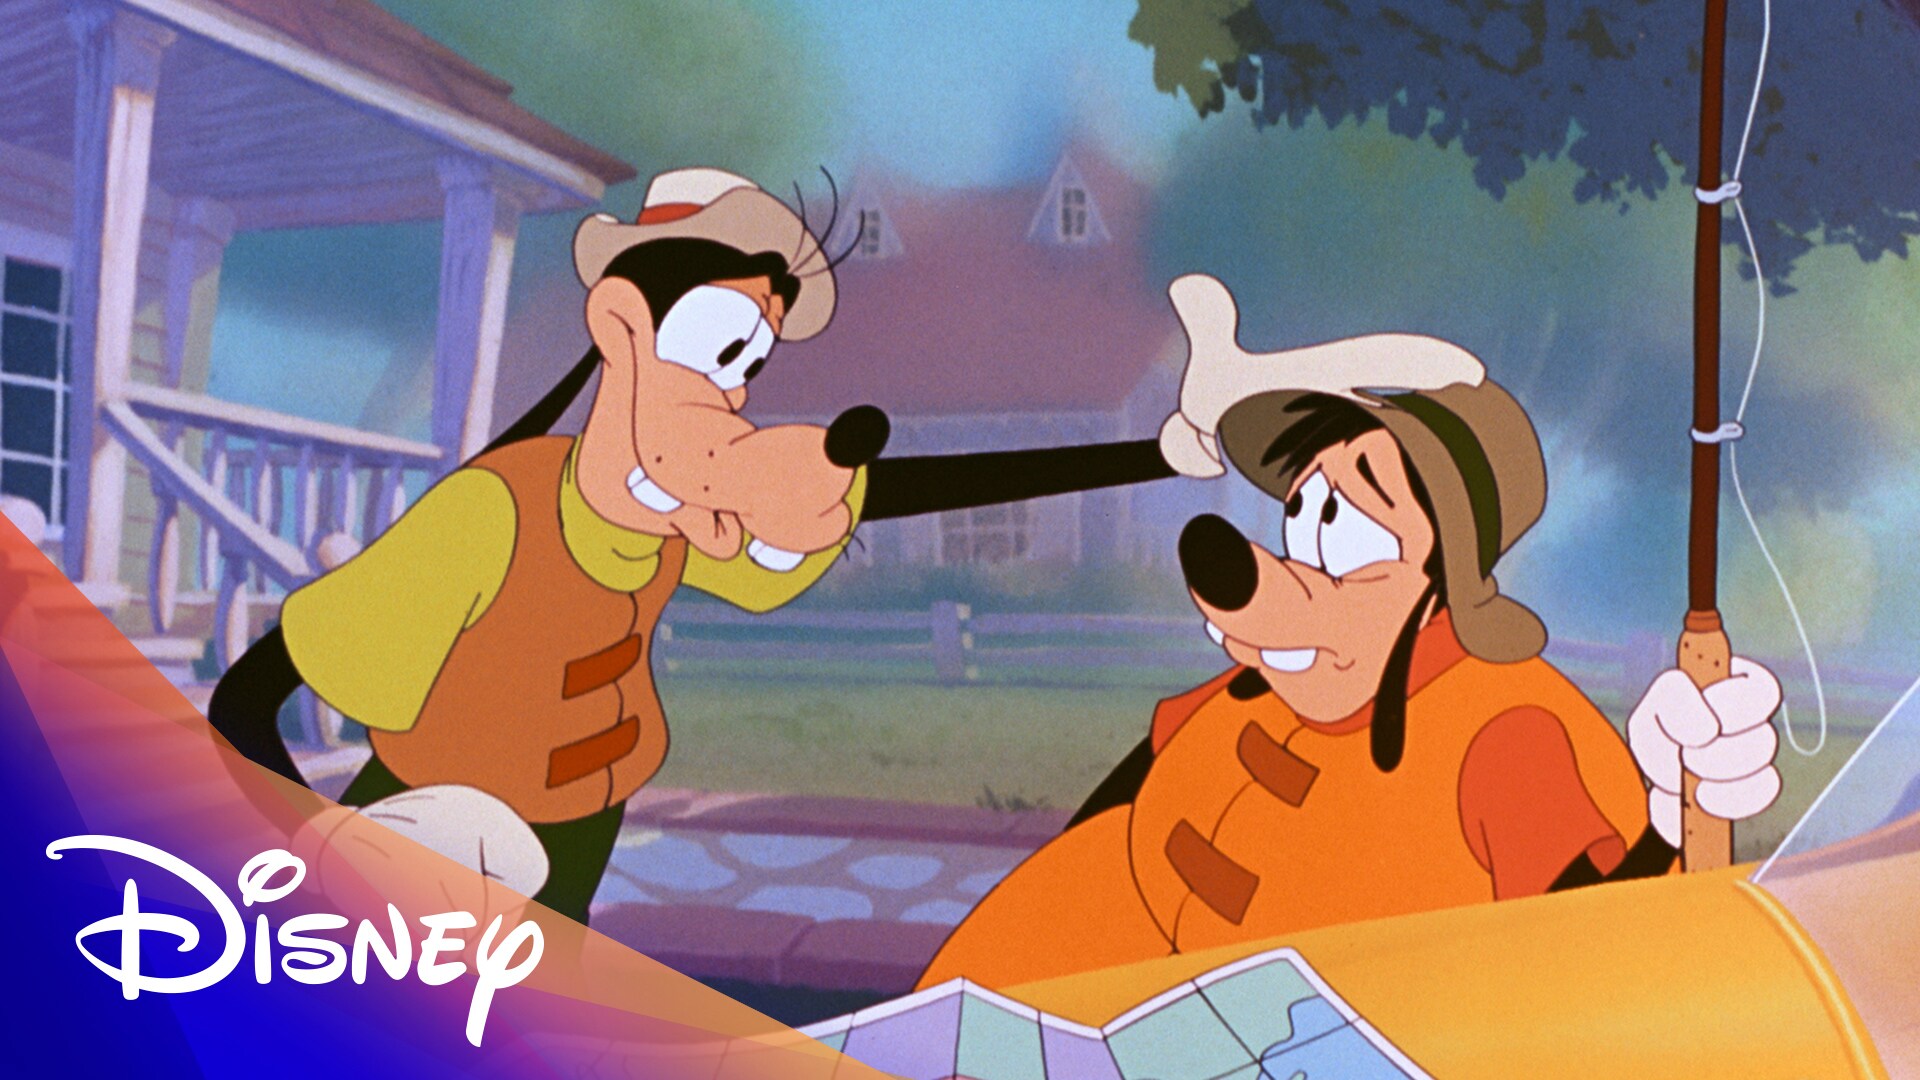 25 Facts for 25 Years of A Goofy Movie | Disney